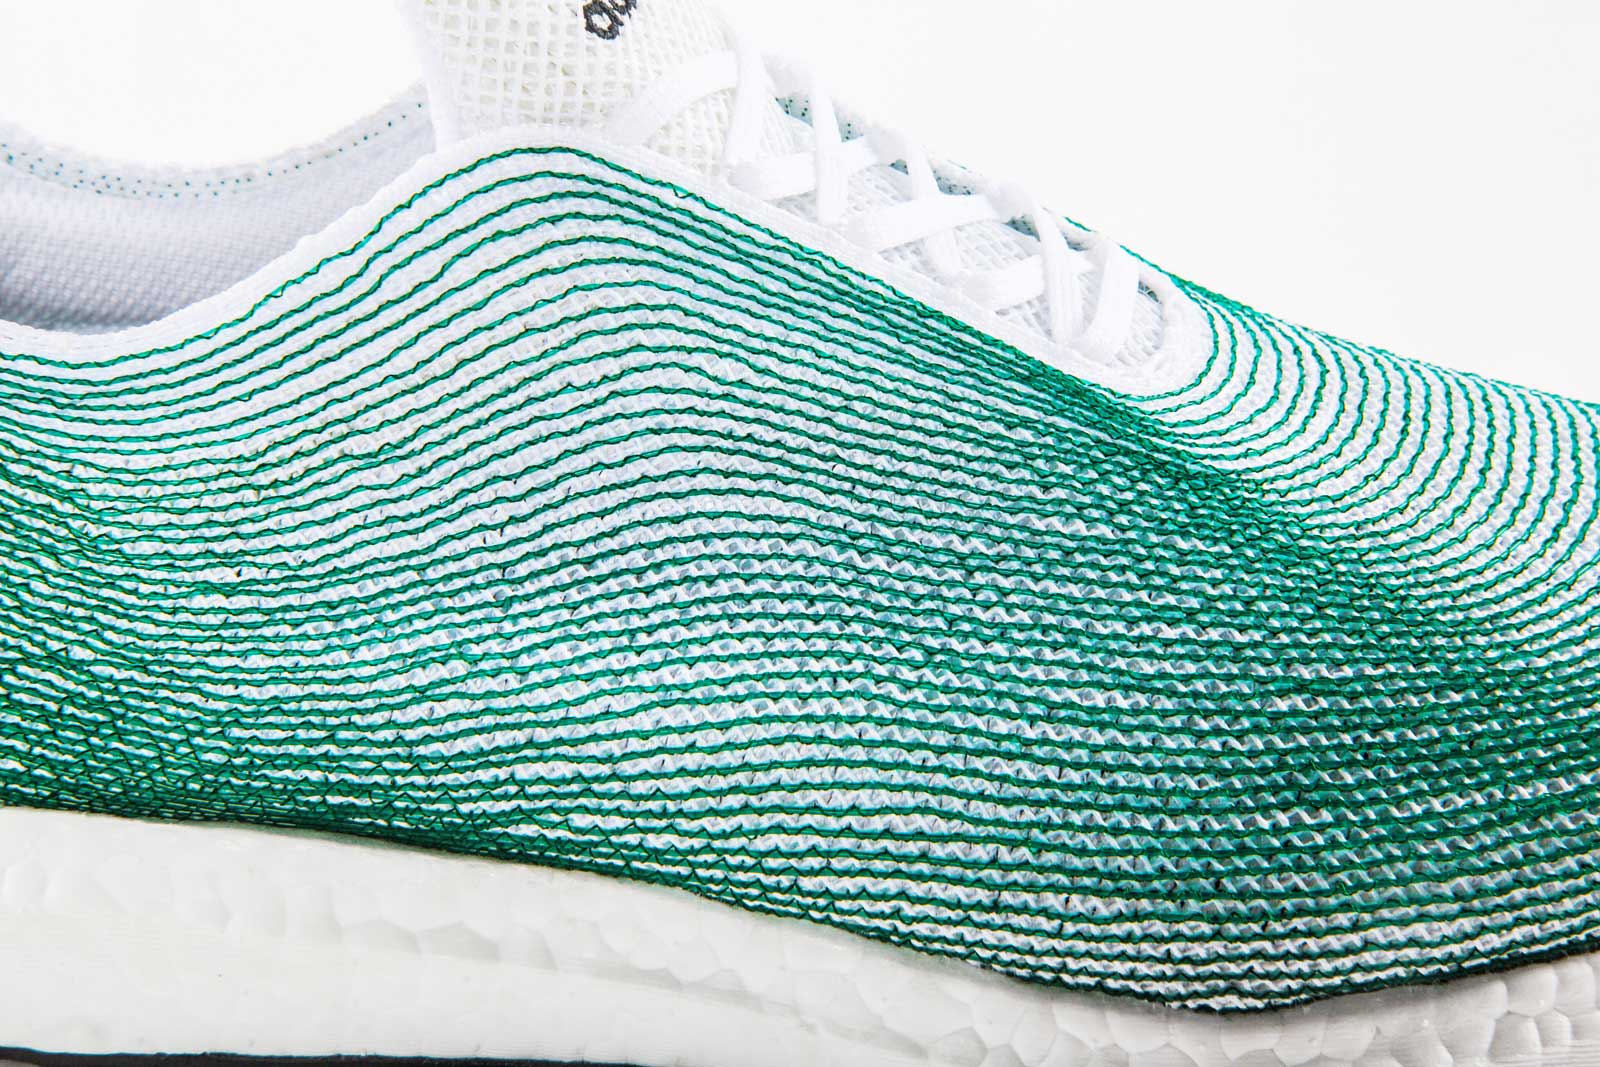 Adidas has sold one million shoes made from recycled ocean plastic -  Climate Action